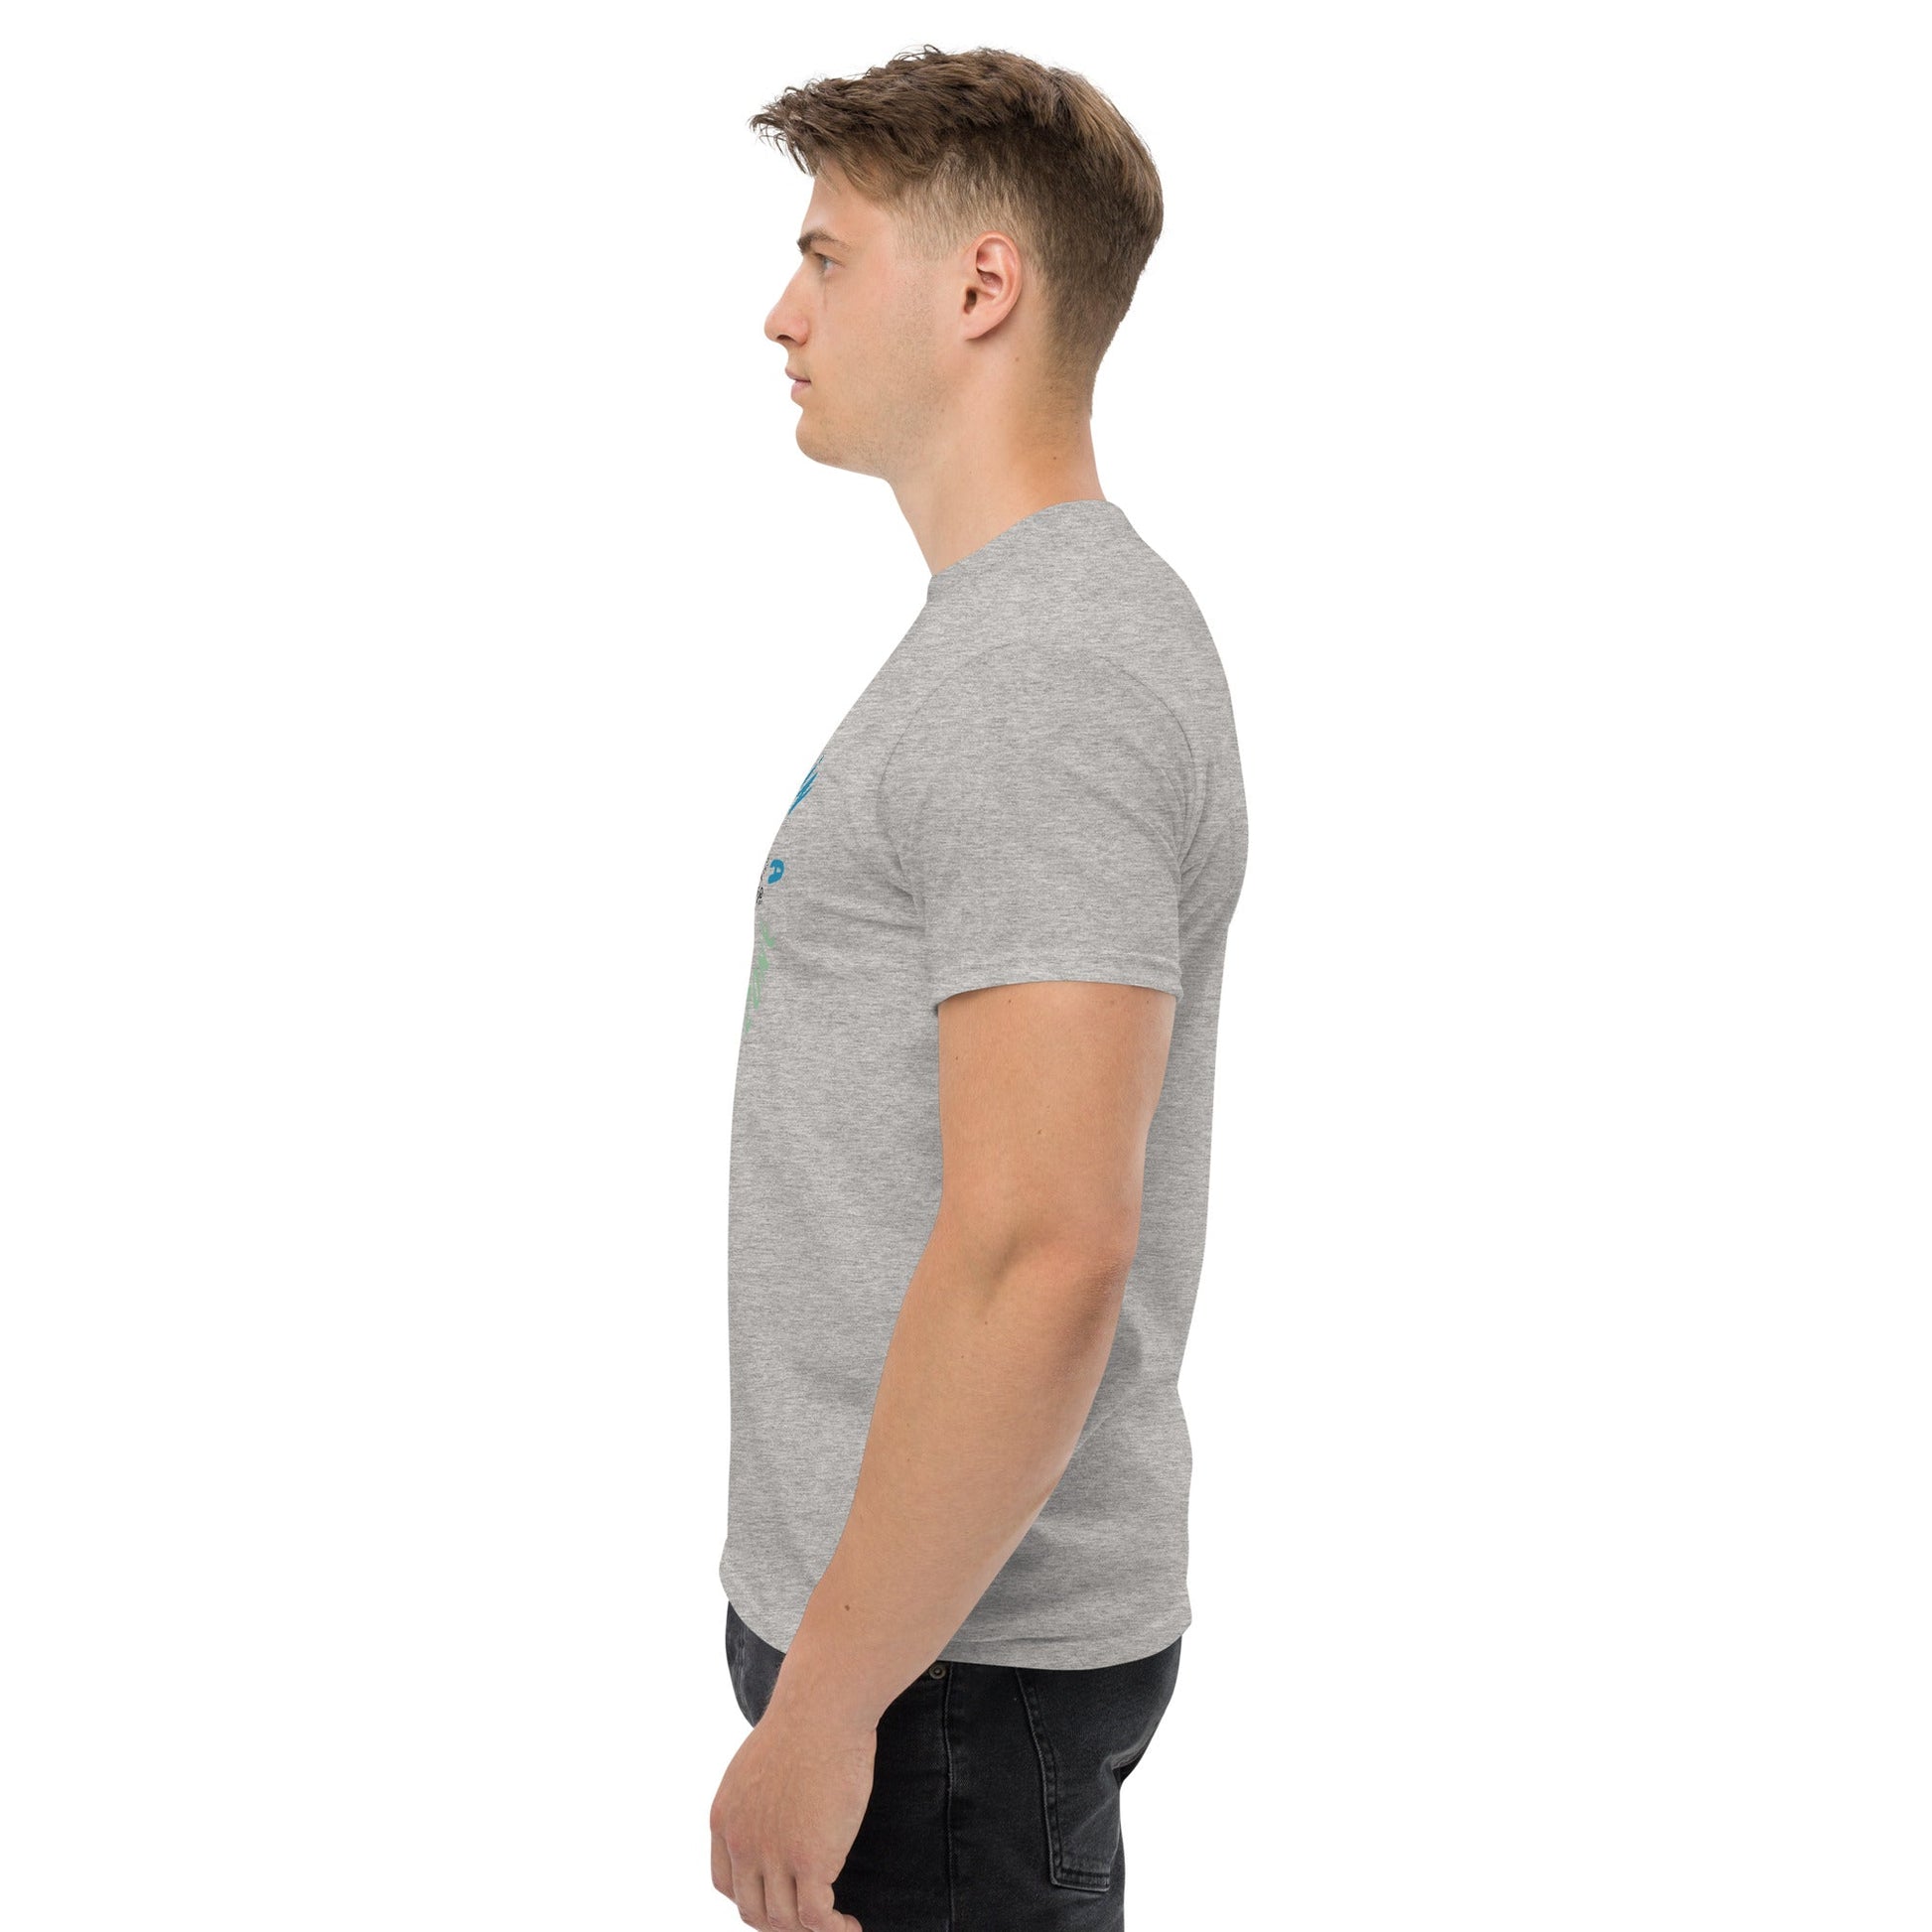 T-Shirt Casual Homme - Comfort Zone - Le Traileur Anonyme